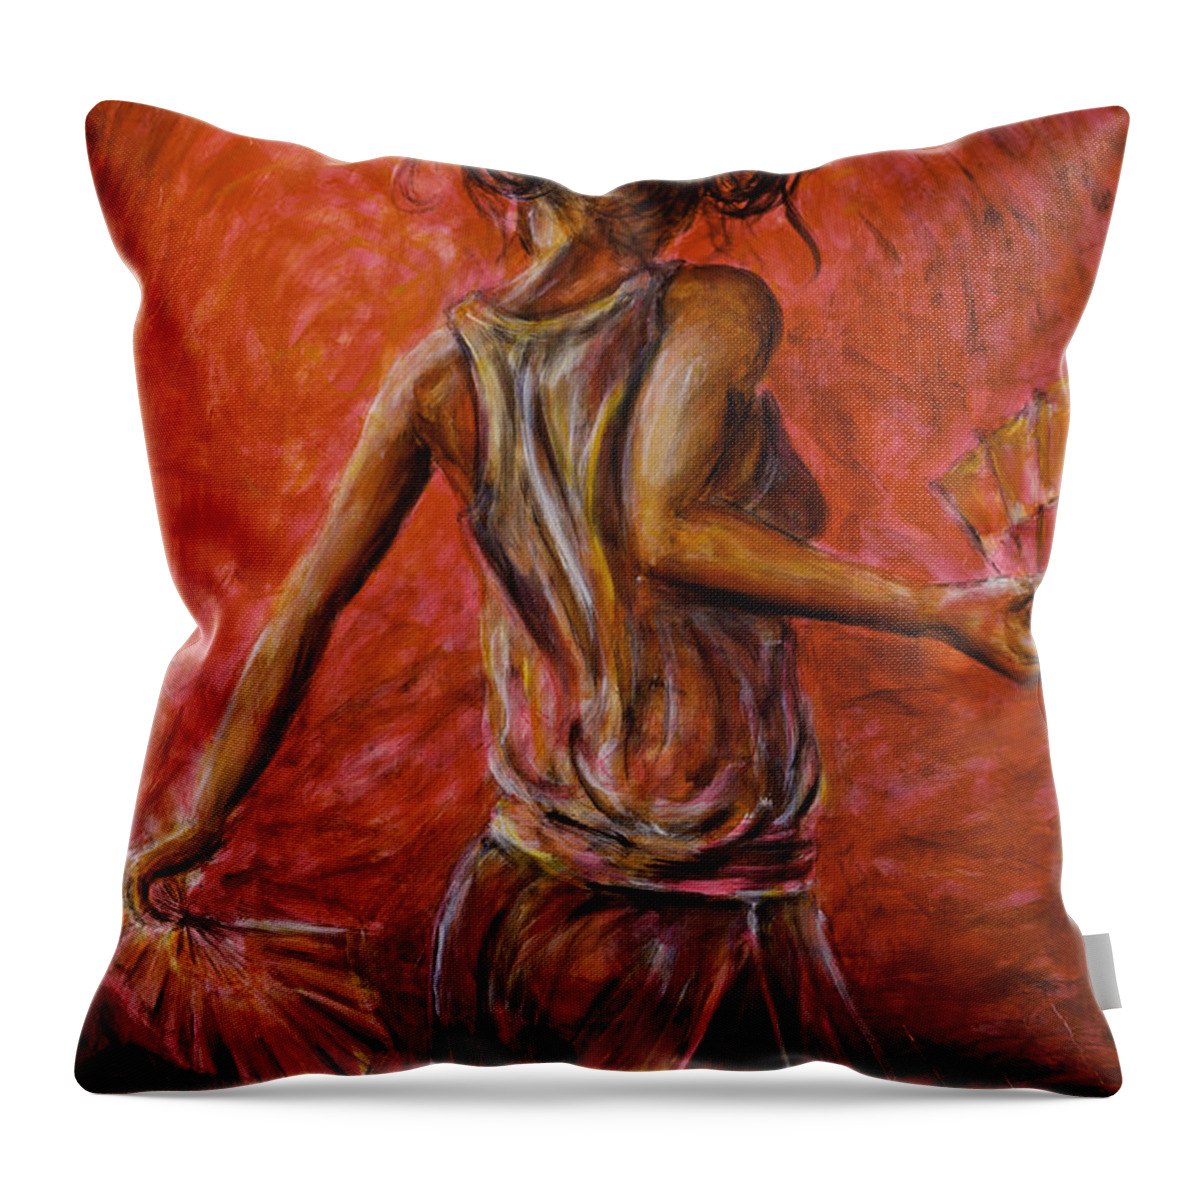 Chinese Throw Pillow featuring the painting Geisha Fan Dance 02 by Nik Helbig